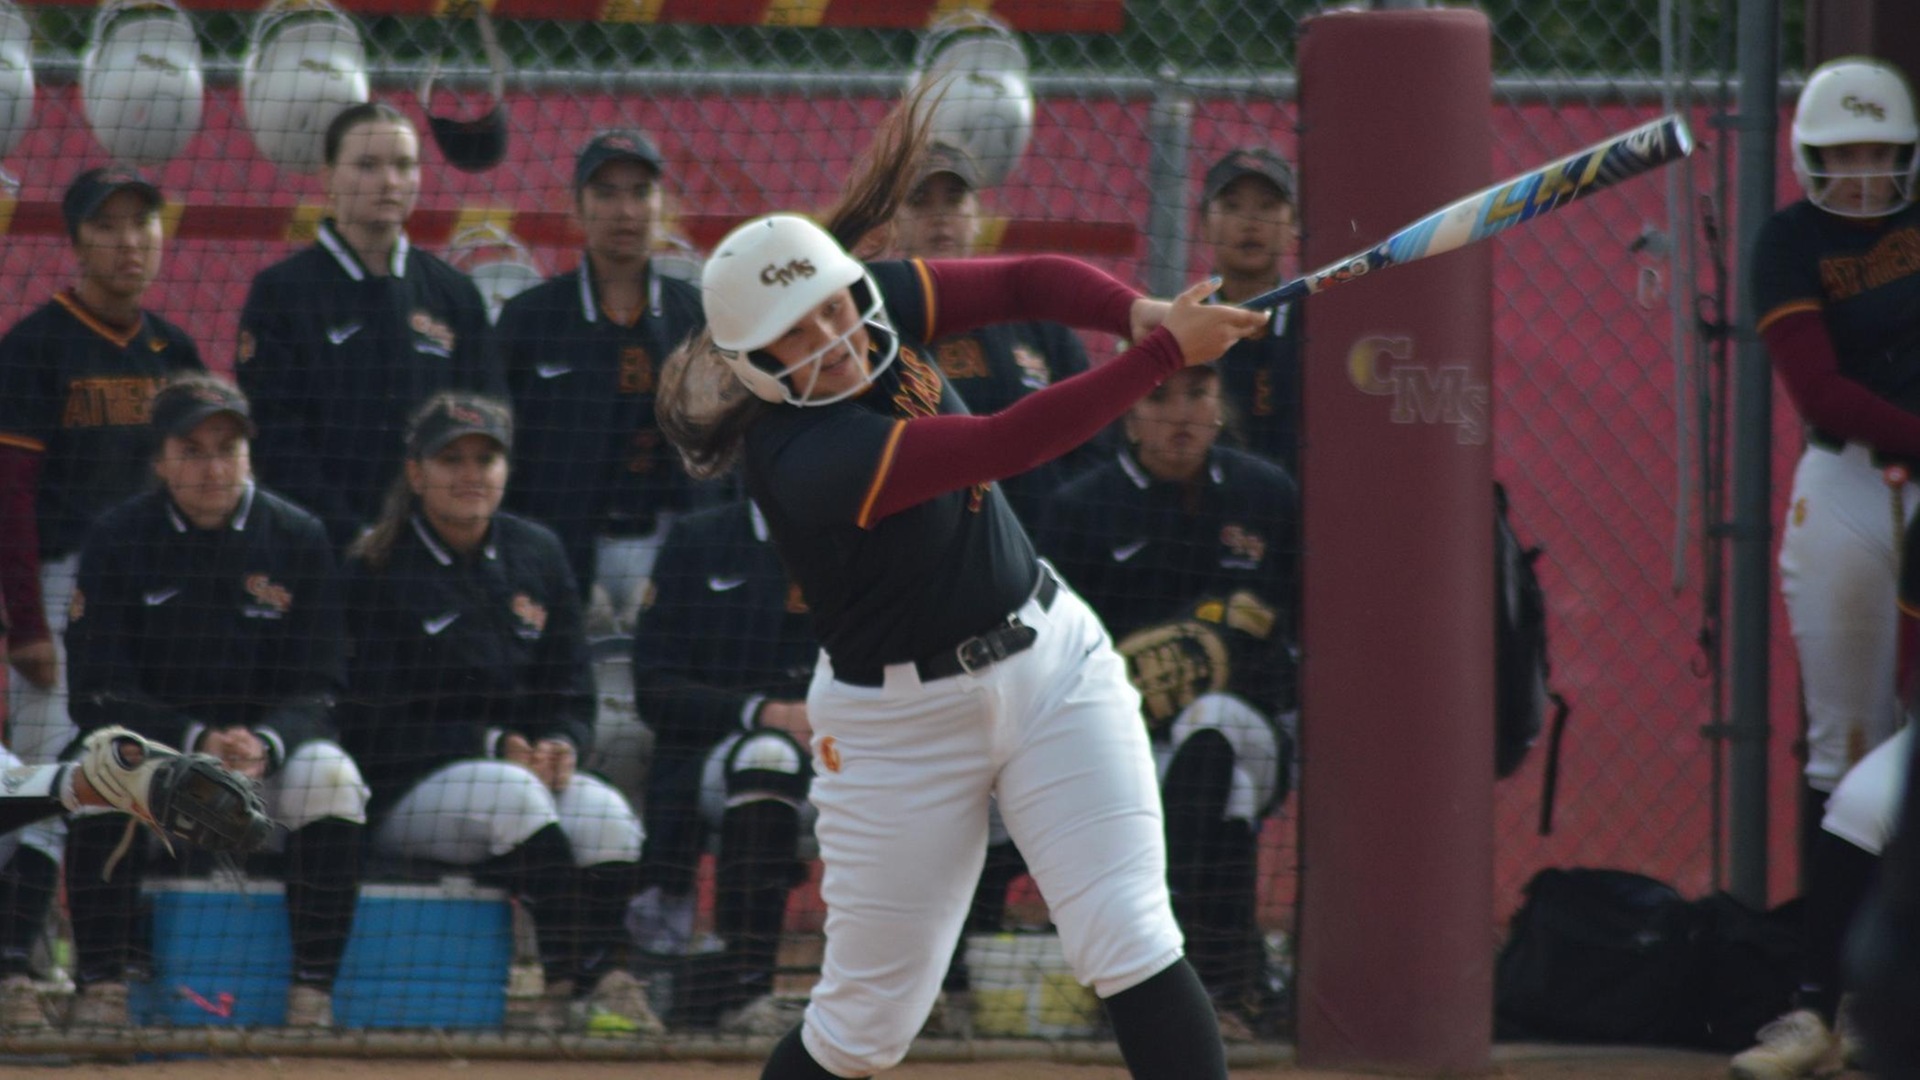 Madison Gonzalez was 2-for-3 with the game-winning squeeze (photo by Ruby Marks)